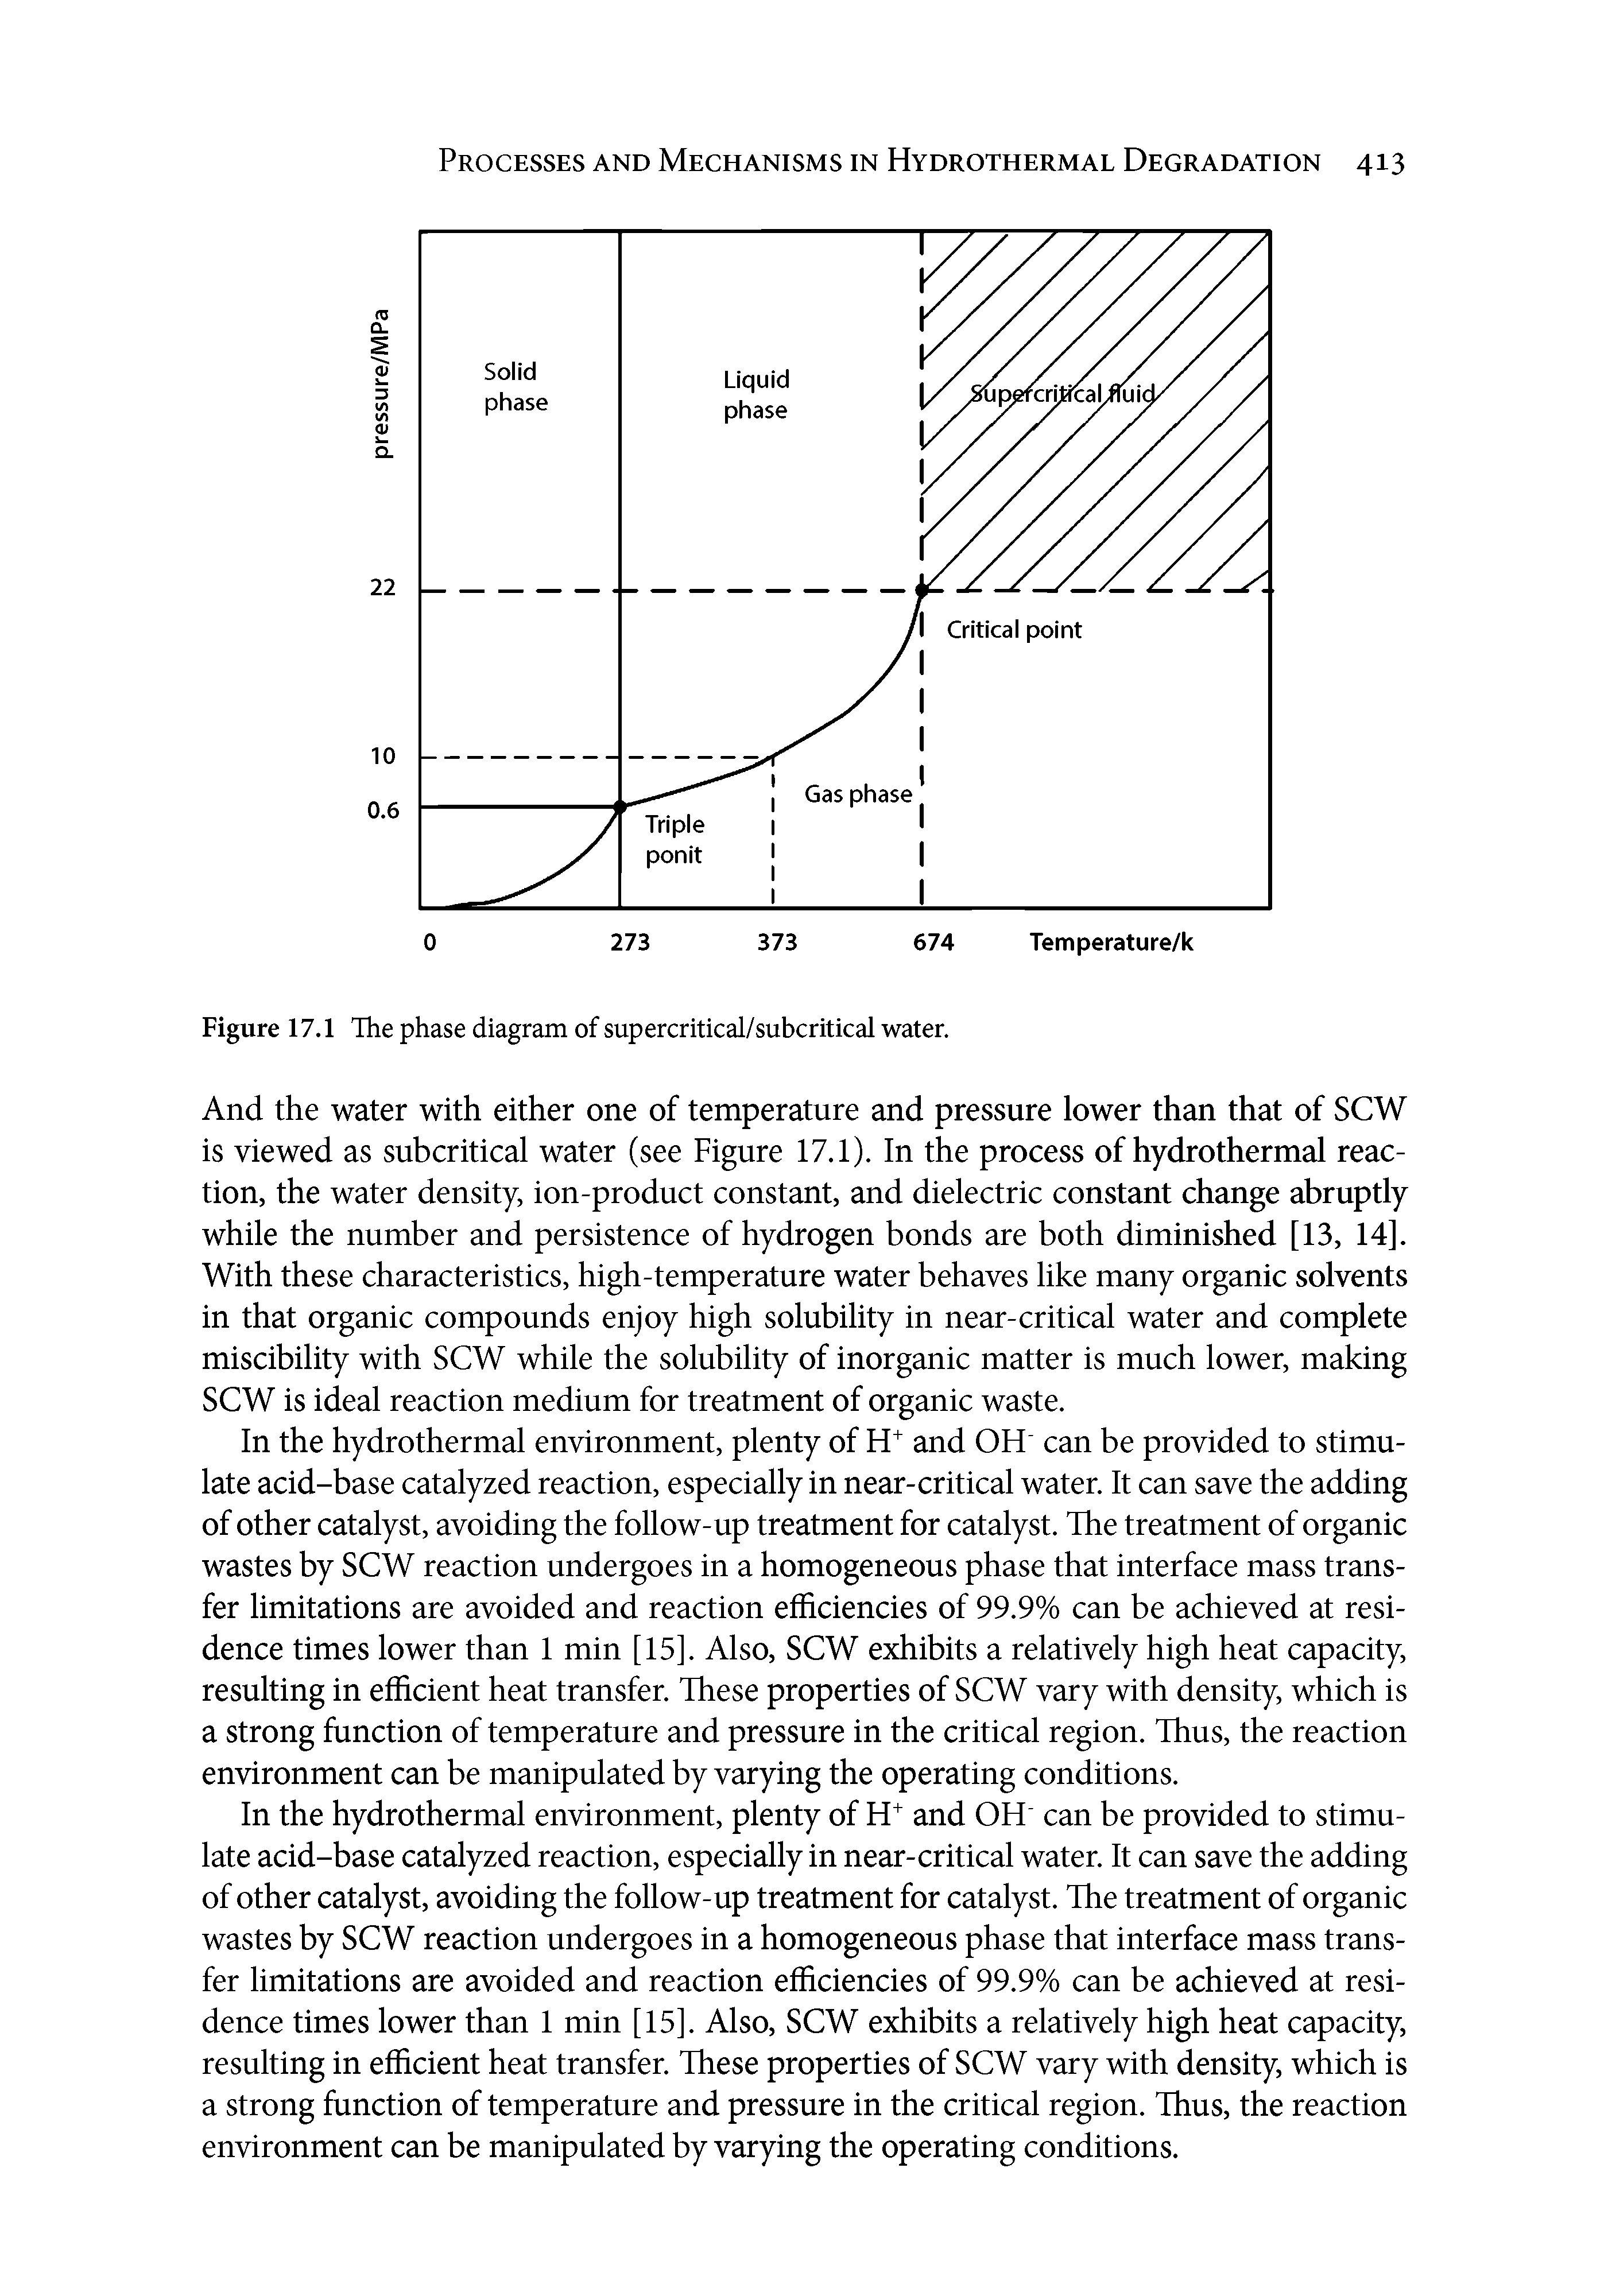 Figure 17.1 The phase diagram of supercritical/subcritical water.